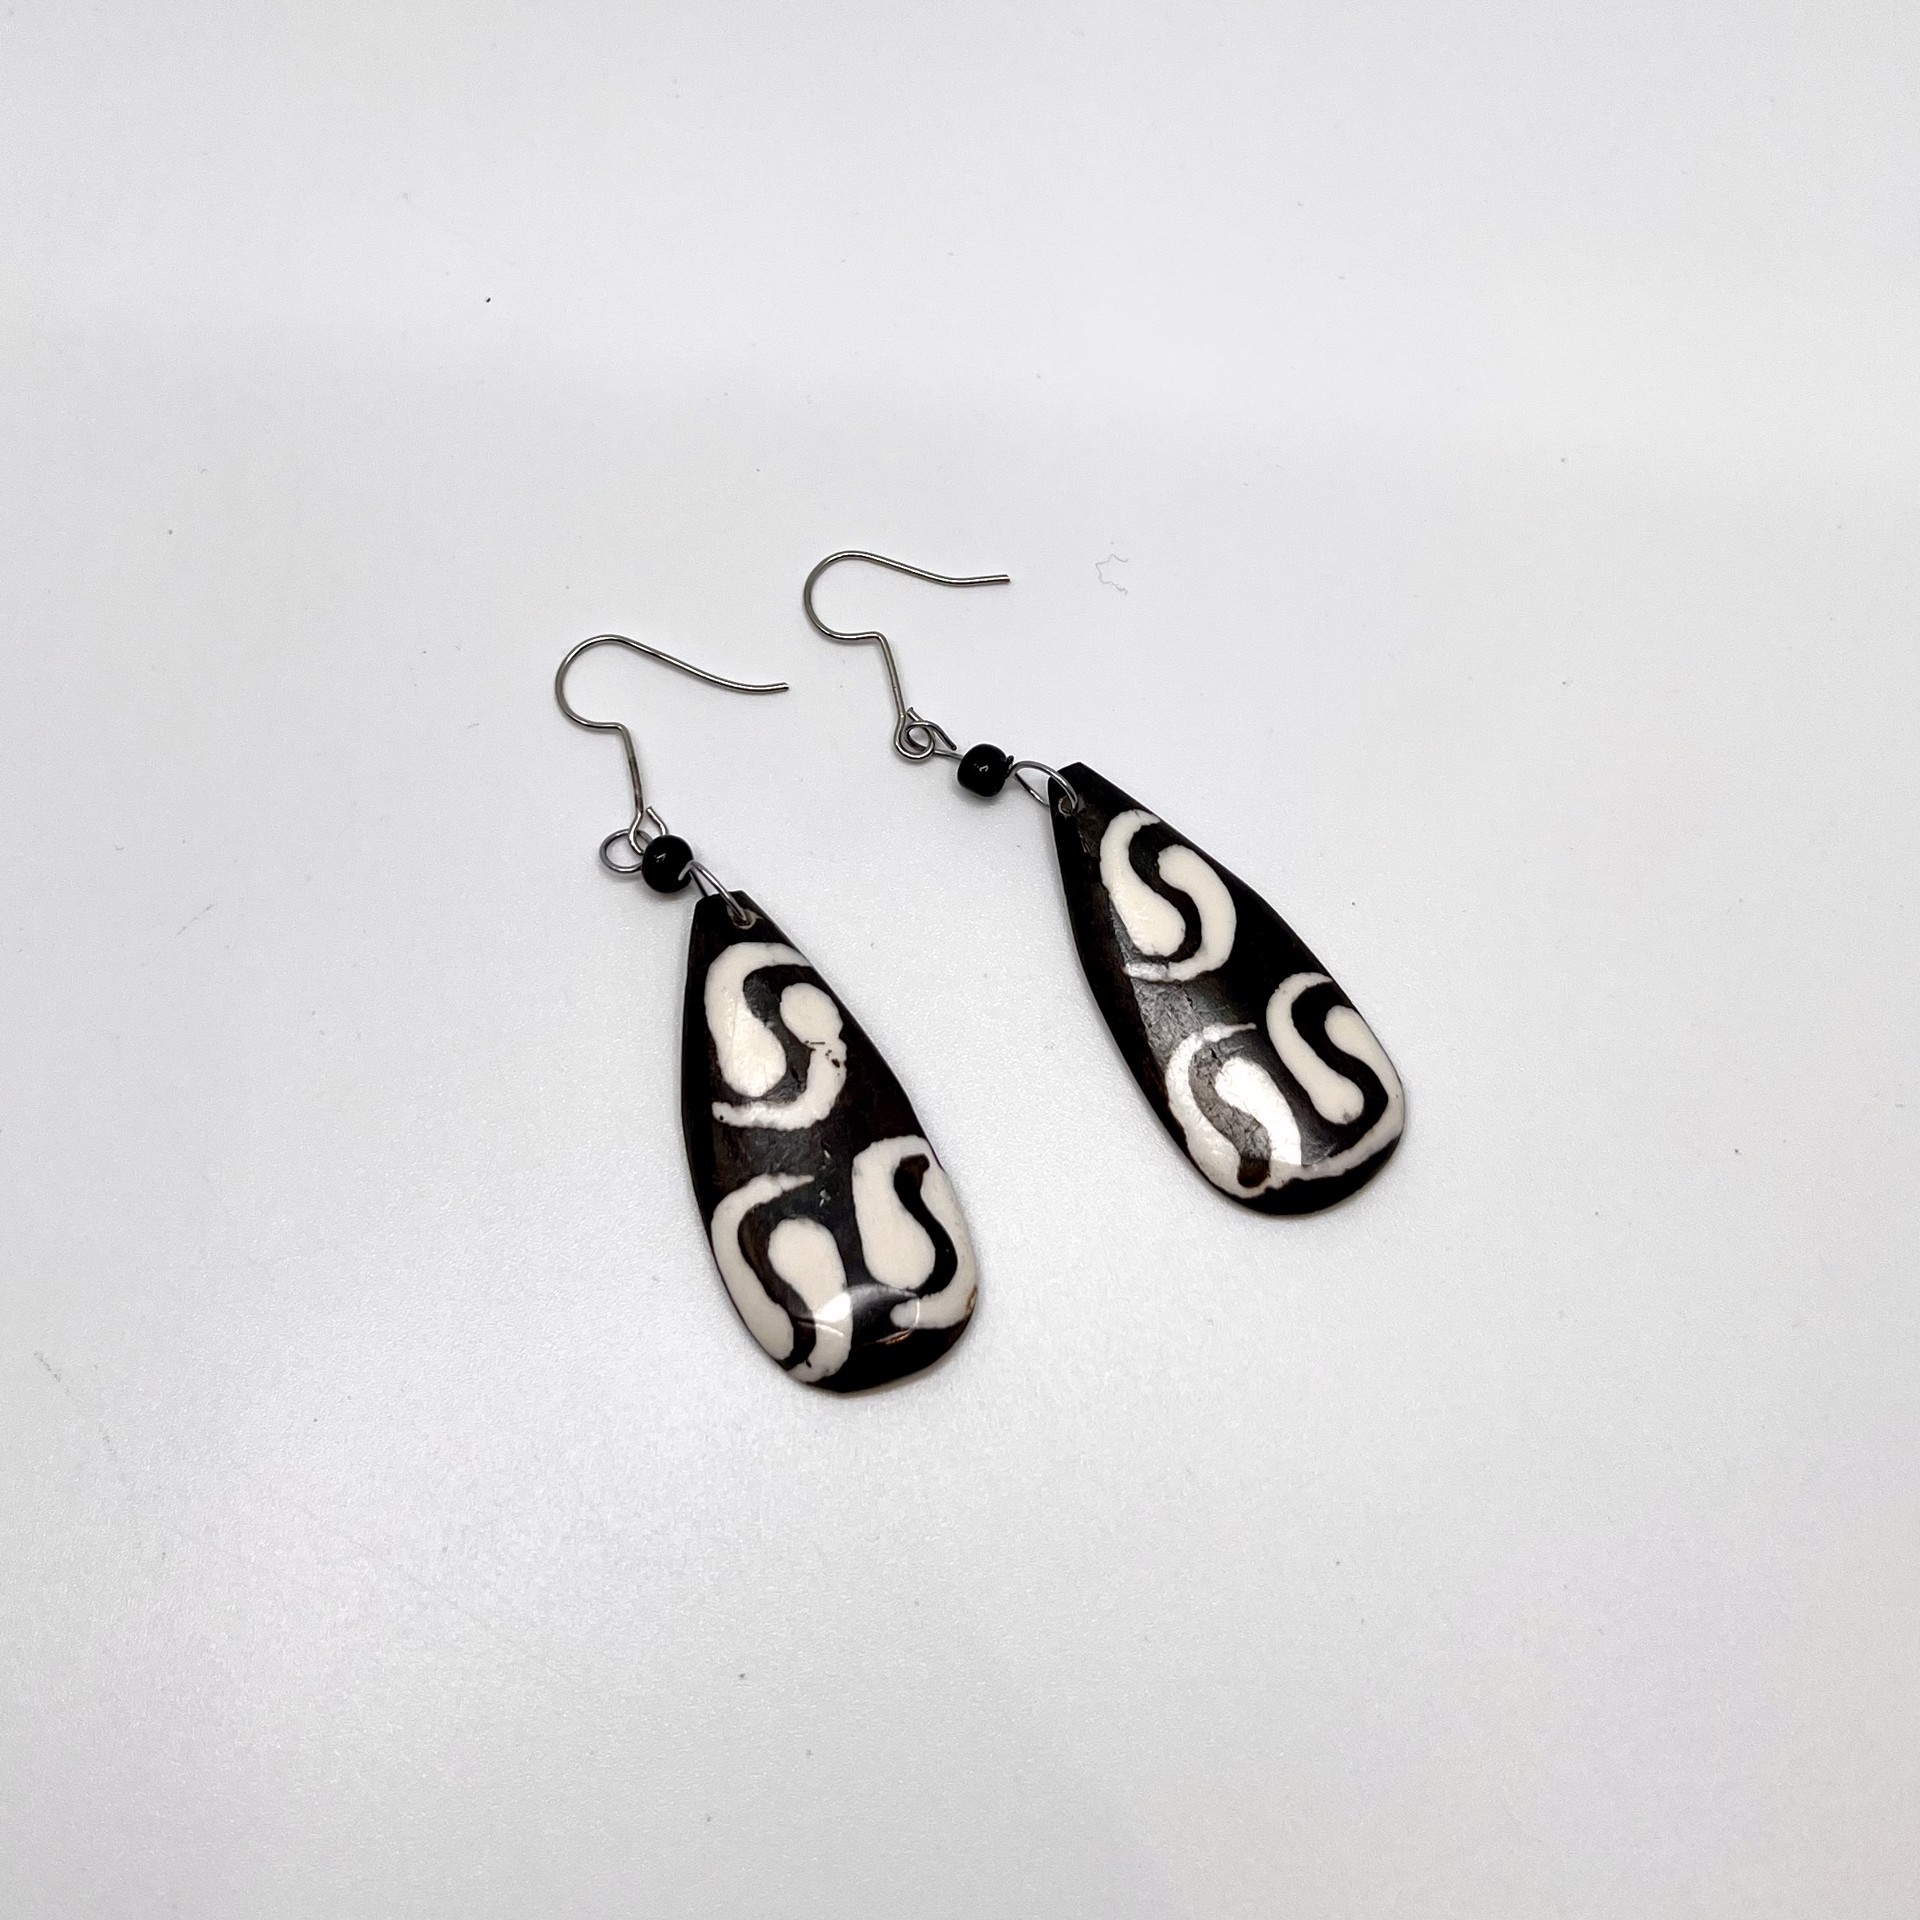 3178 Brown and White Teardrop Earrings by Gina Caruso